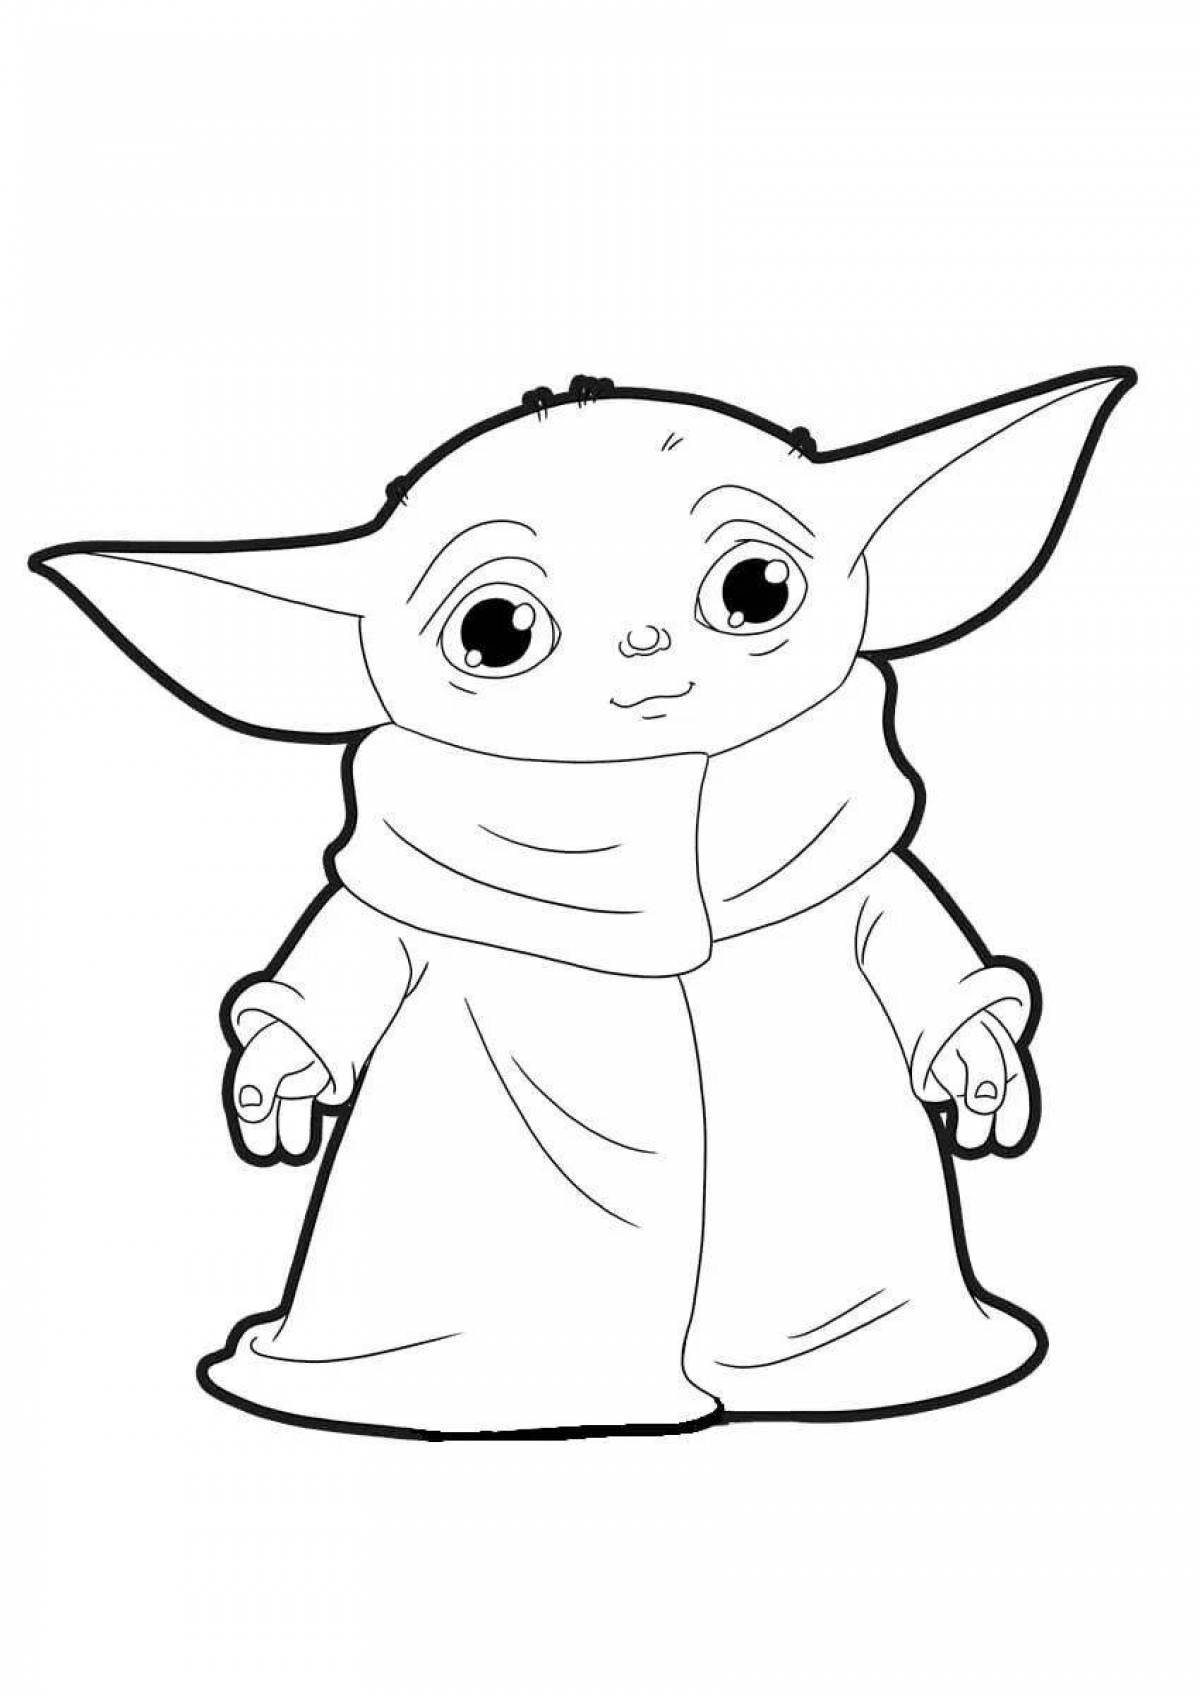 Yoda's brilliantly shaded coloring page